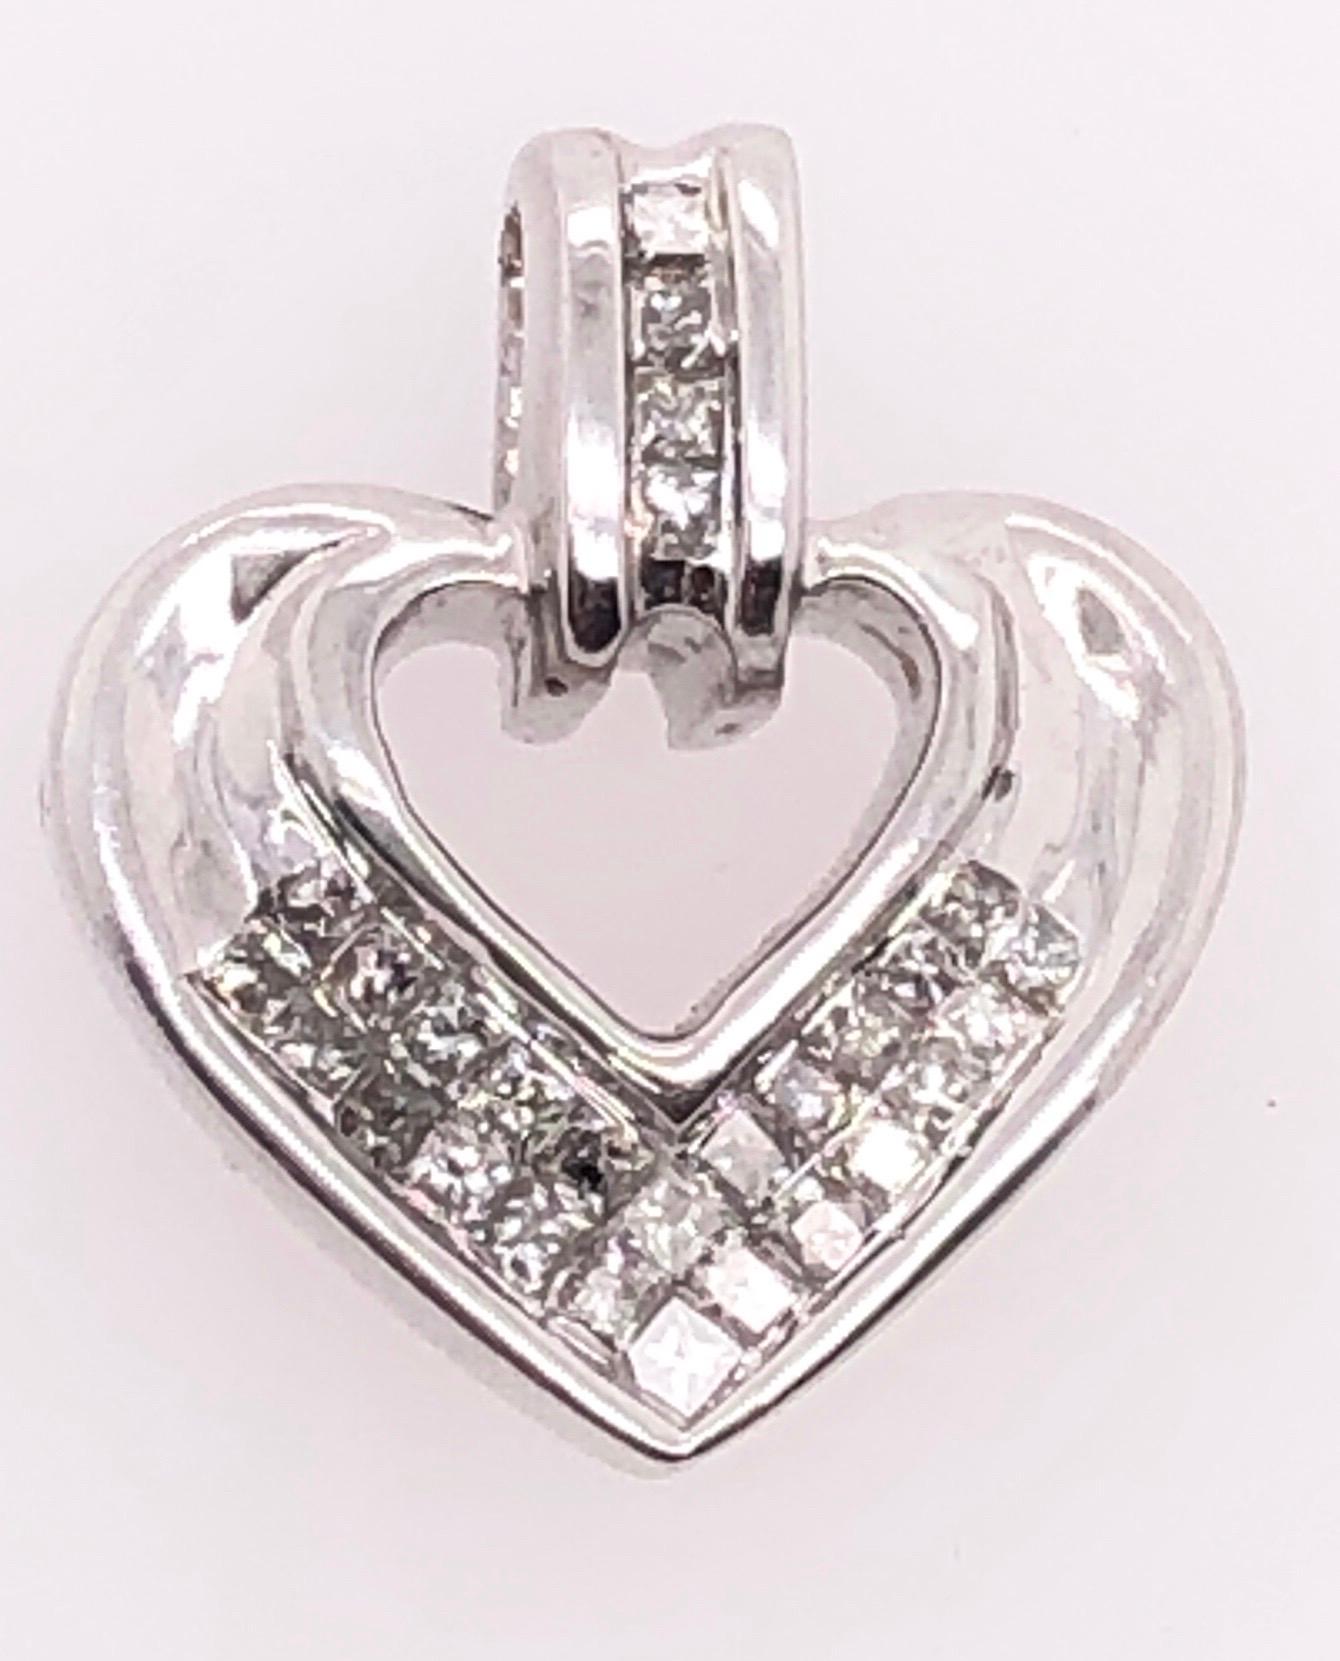 14 Karat White Gold Heart Pendant with Princess Cut Diamonds 0.25 TDW In Good Condition For Sale In Stamford, CT